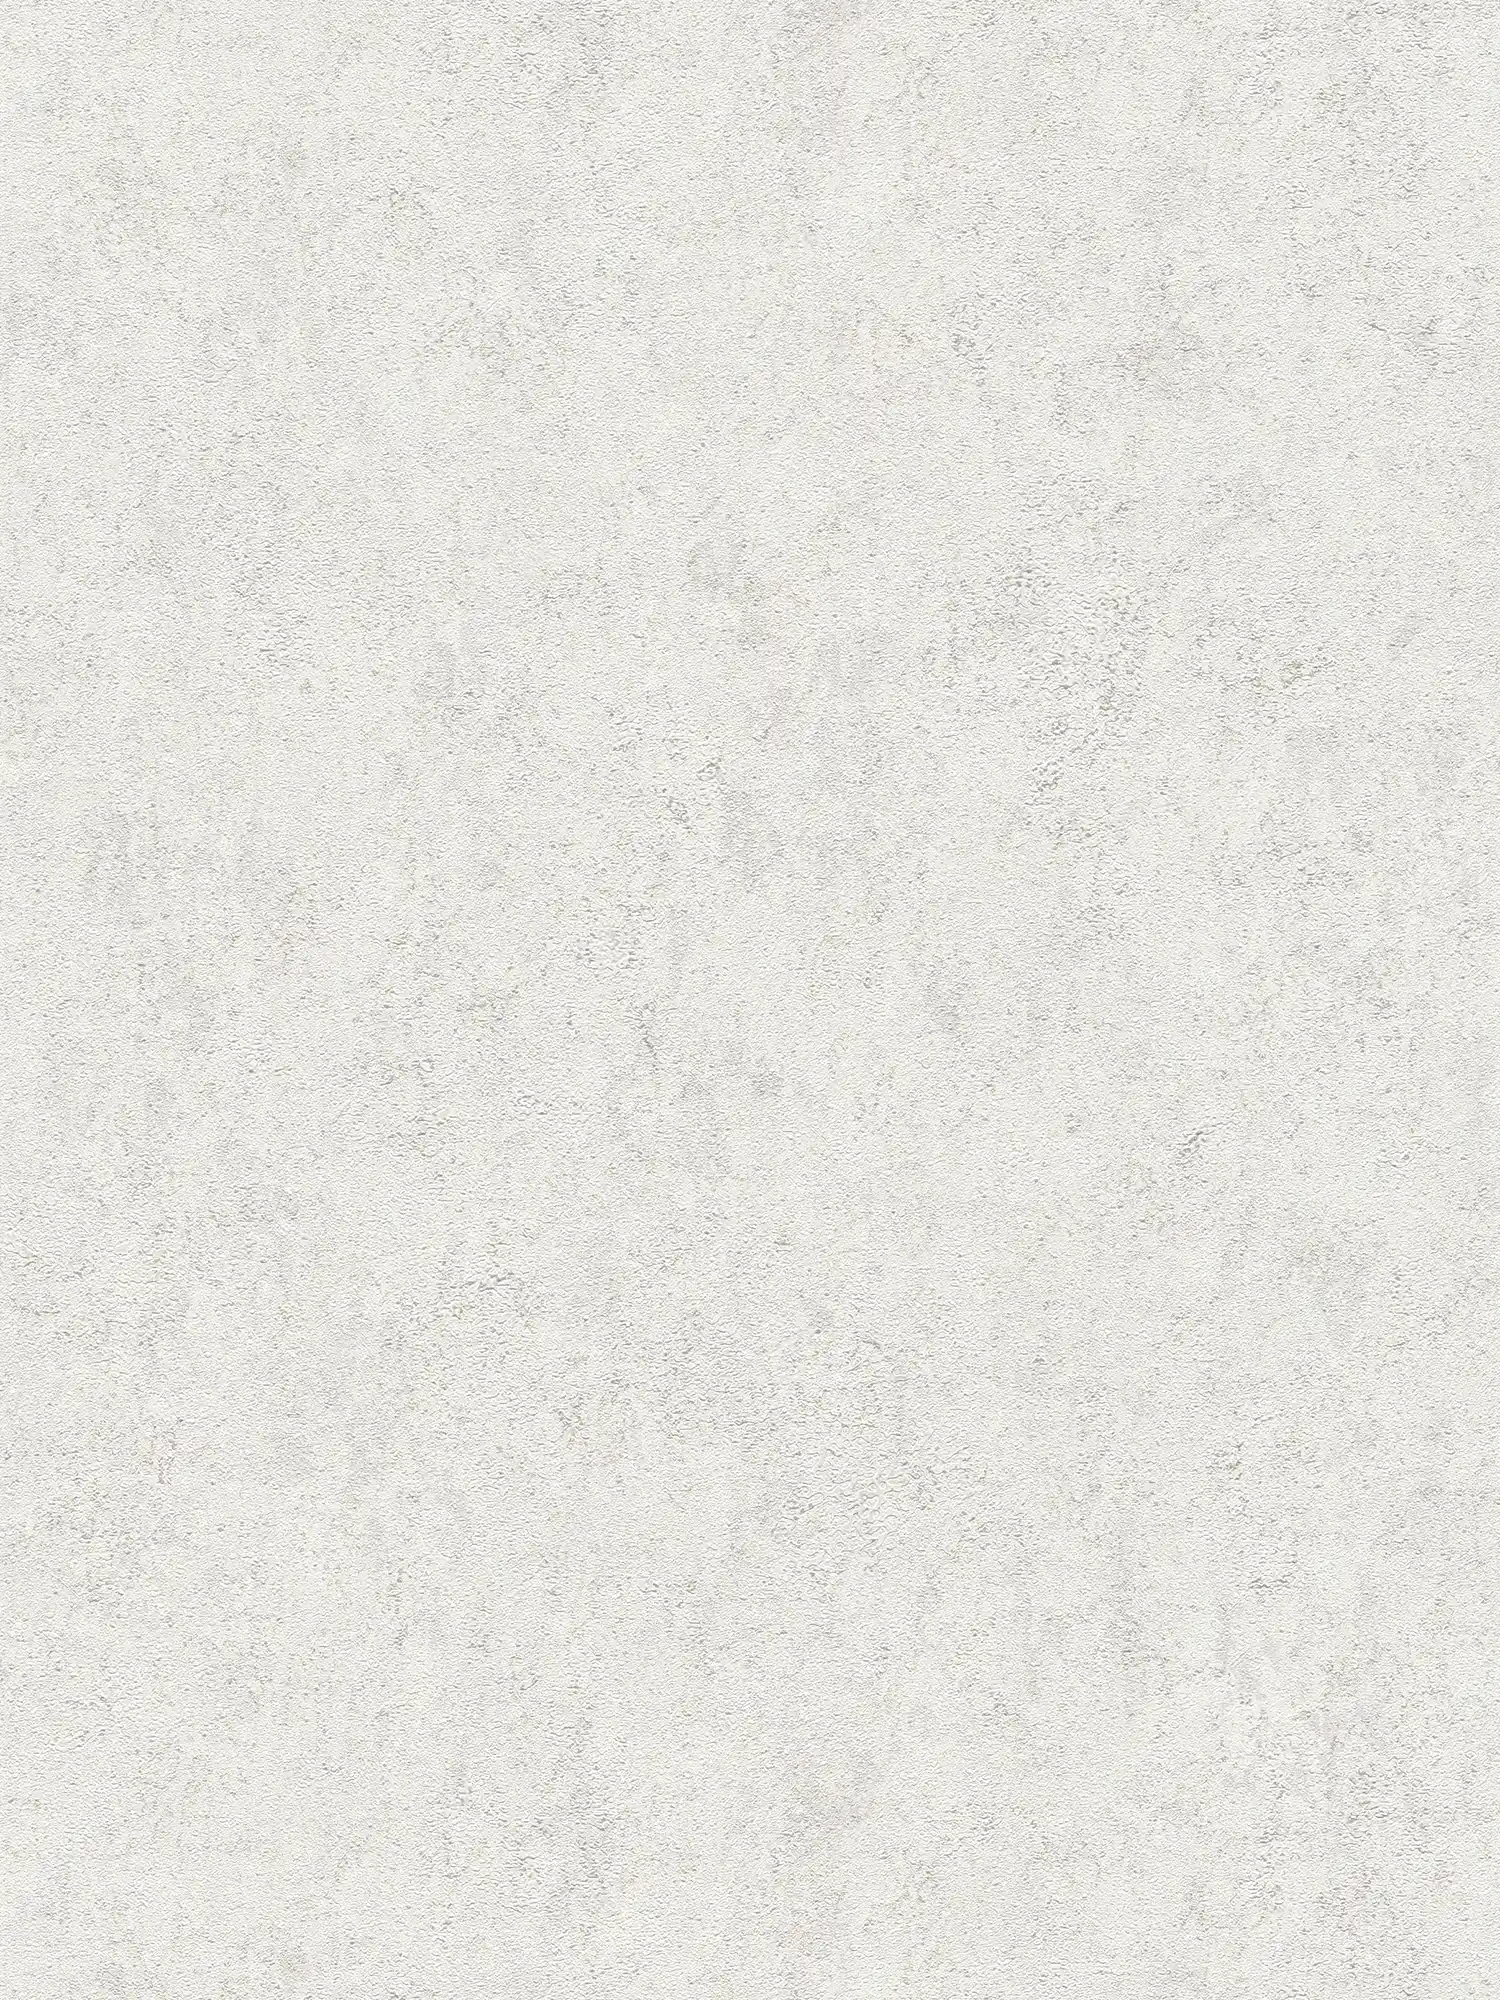 textured wallpaper plain with metallic effect glossy - white
